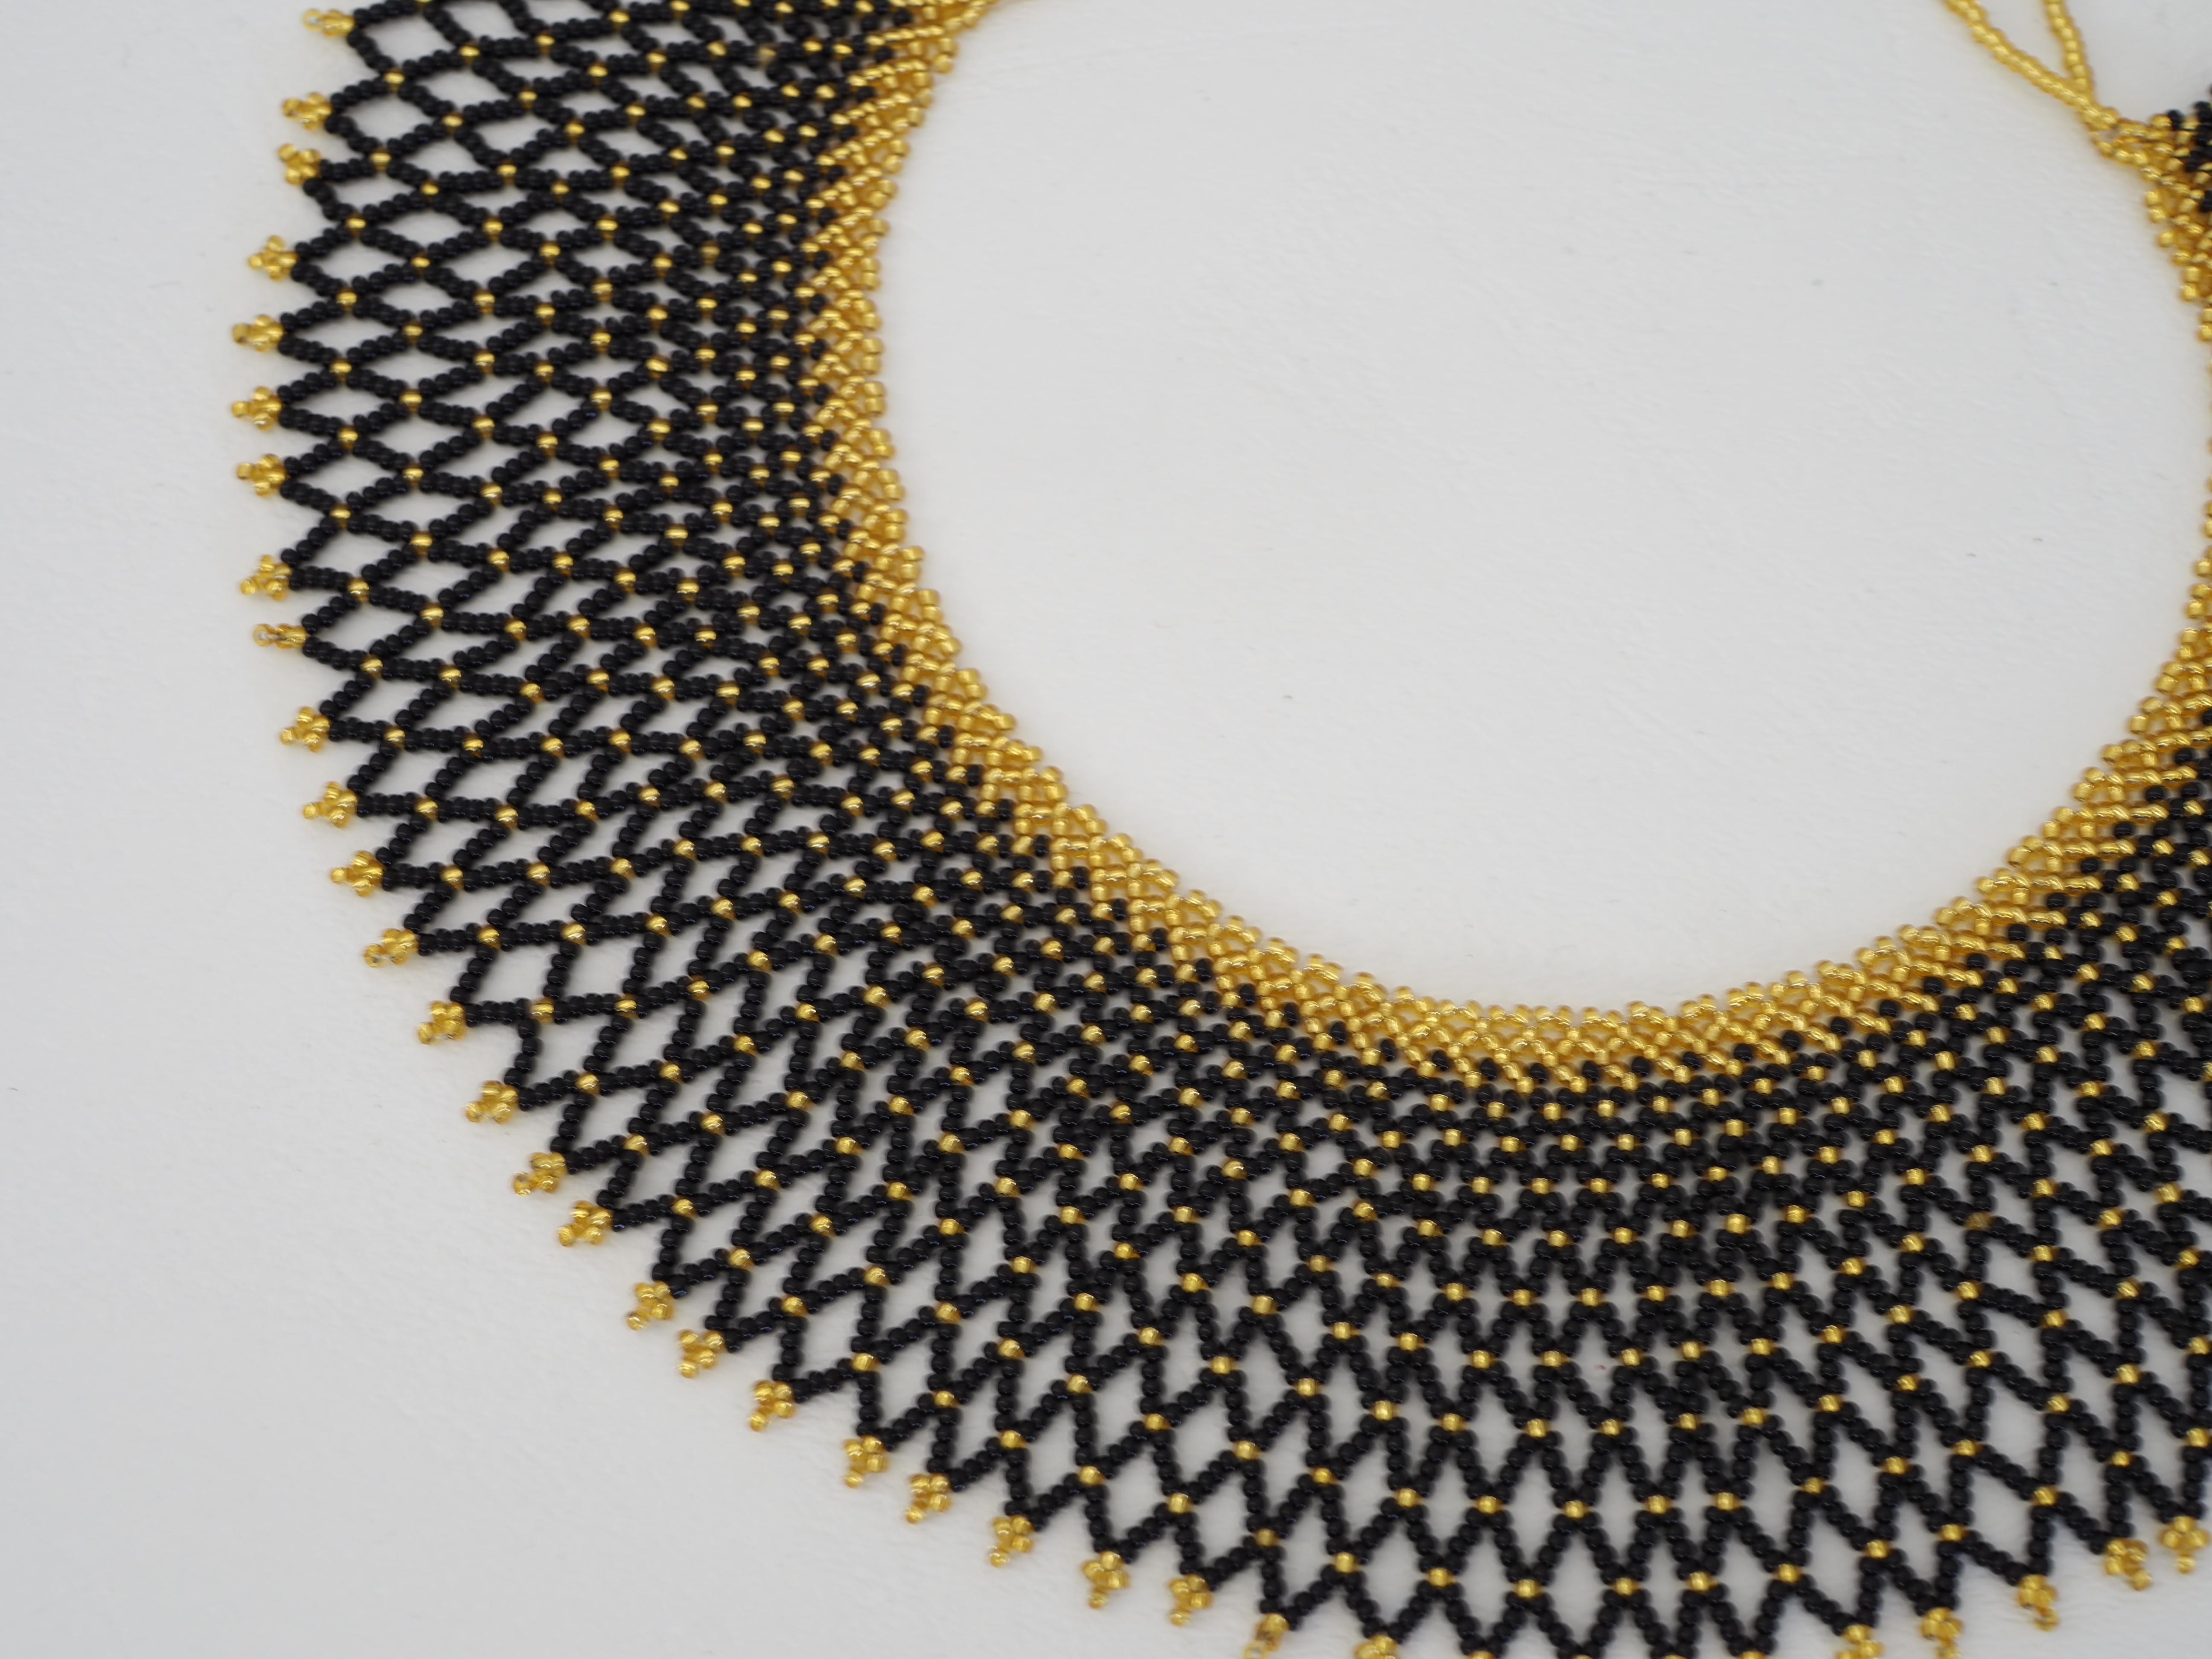 Women's or Men's Vintage Black and gold tone beads necklace